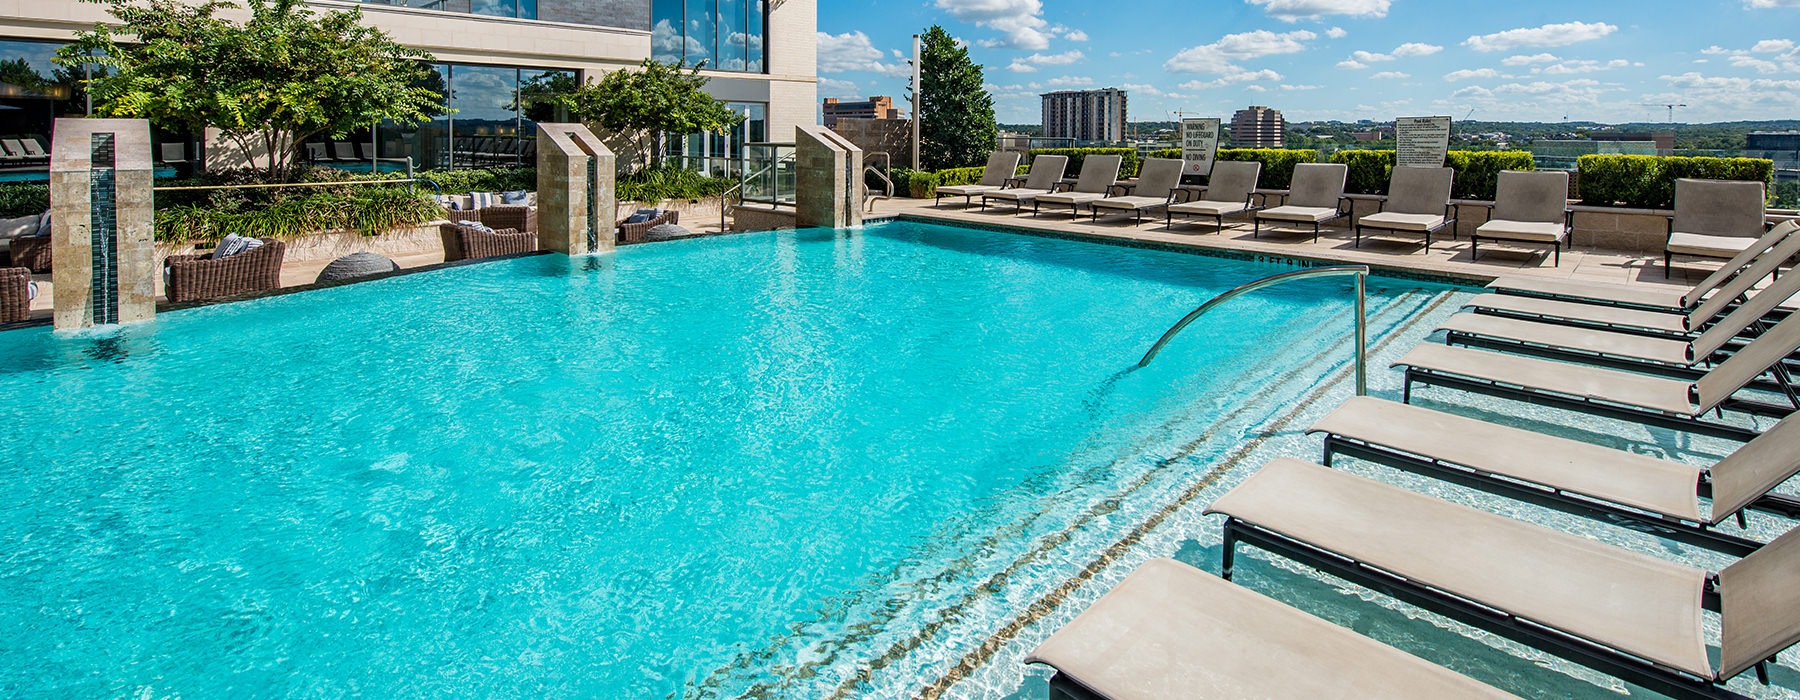 Large resort style sparkling blue swimming pool surrounded by a massive deck with plenty of seating.